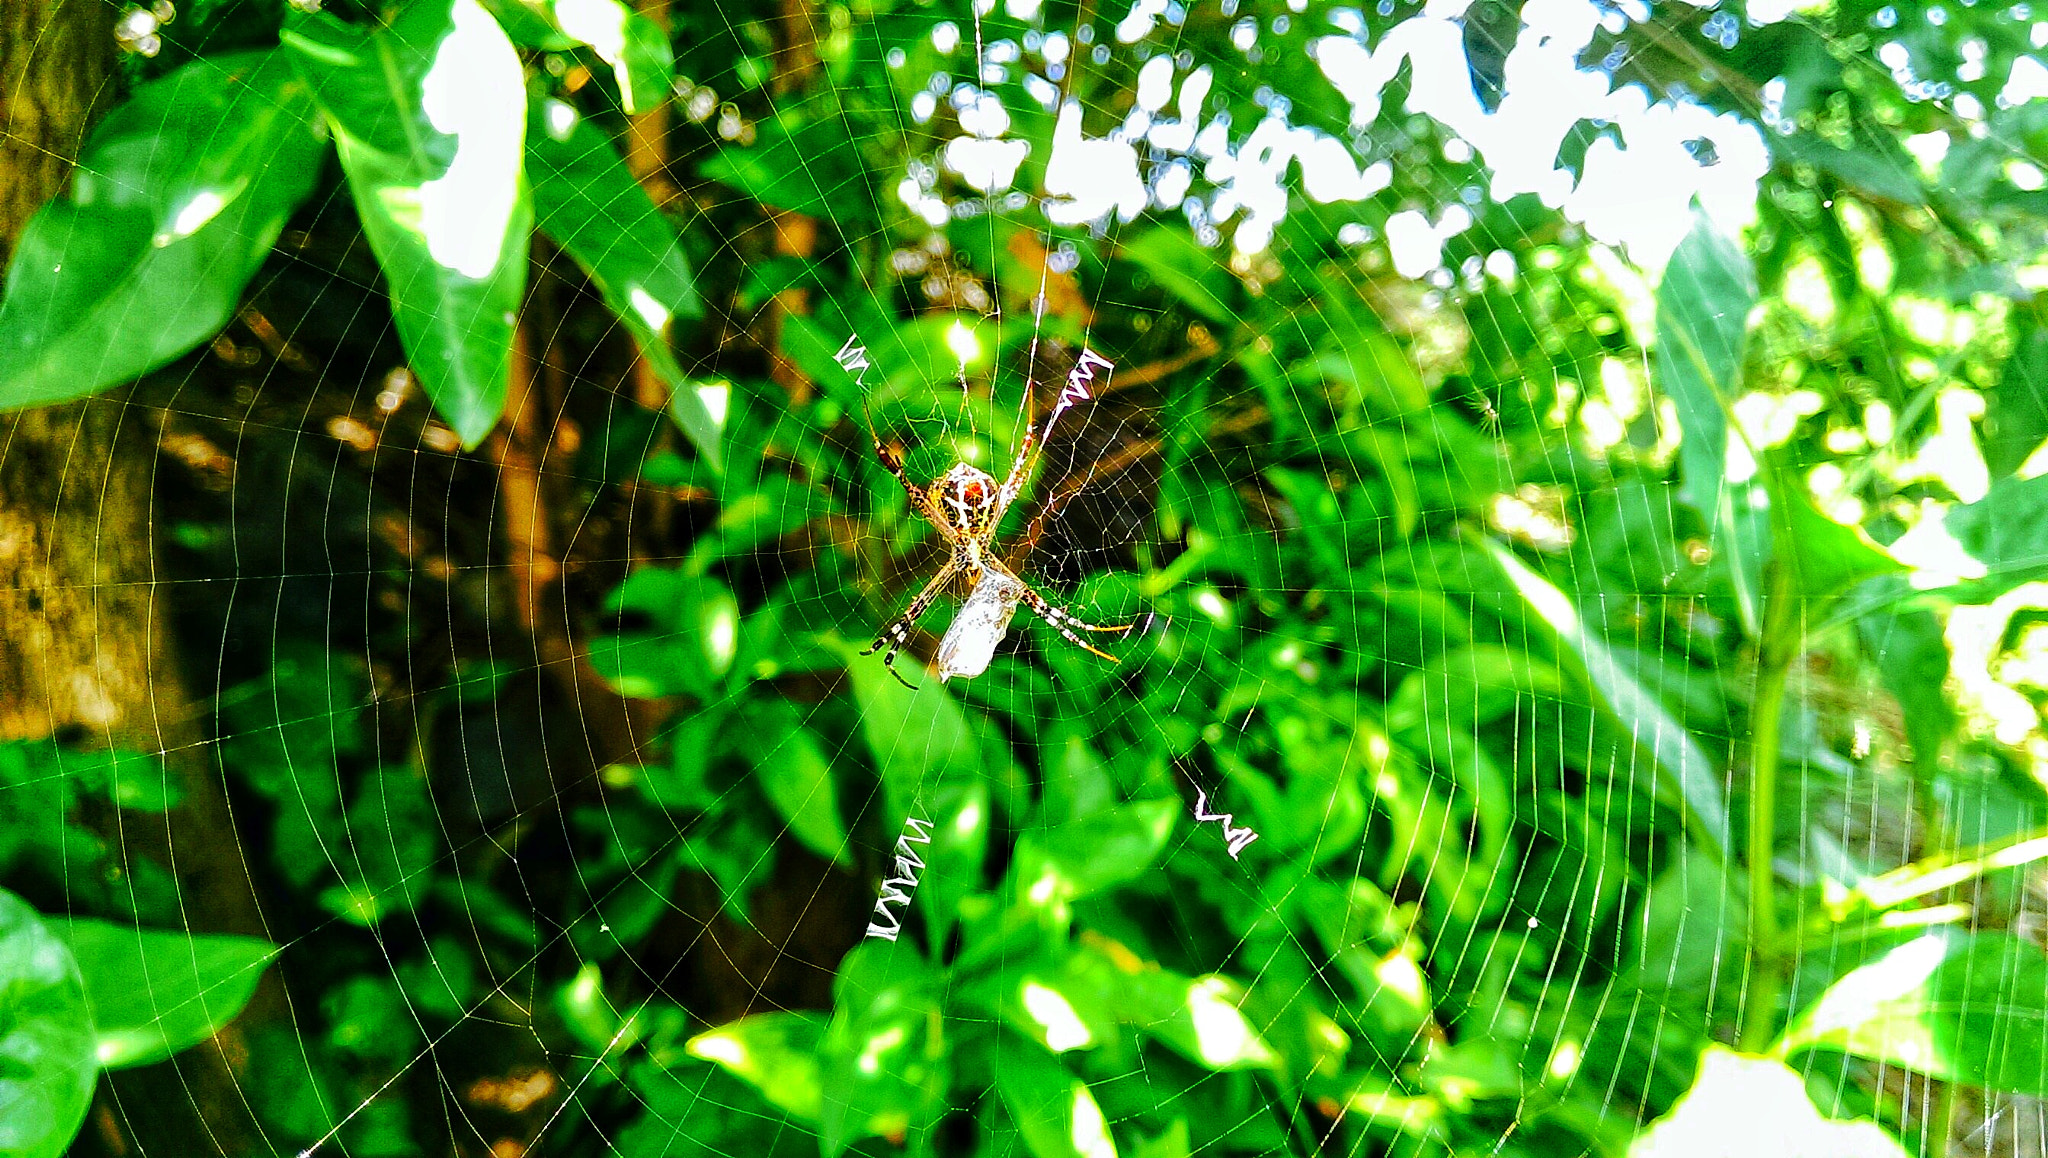 HTC ONE MINI sample photo. Macro photography of a spider in his web nest, the spider is waiting for his next prey. photography